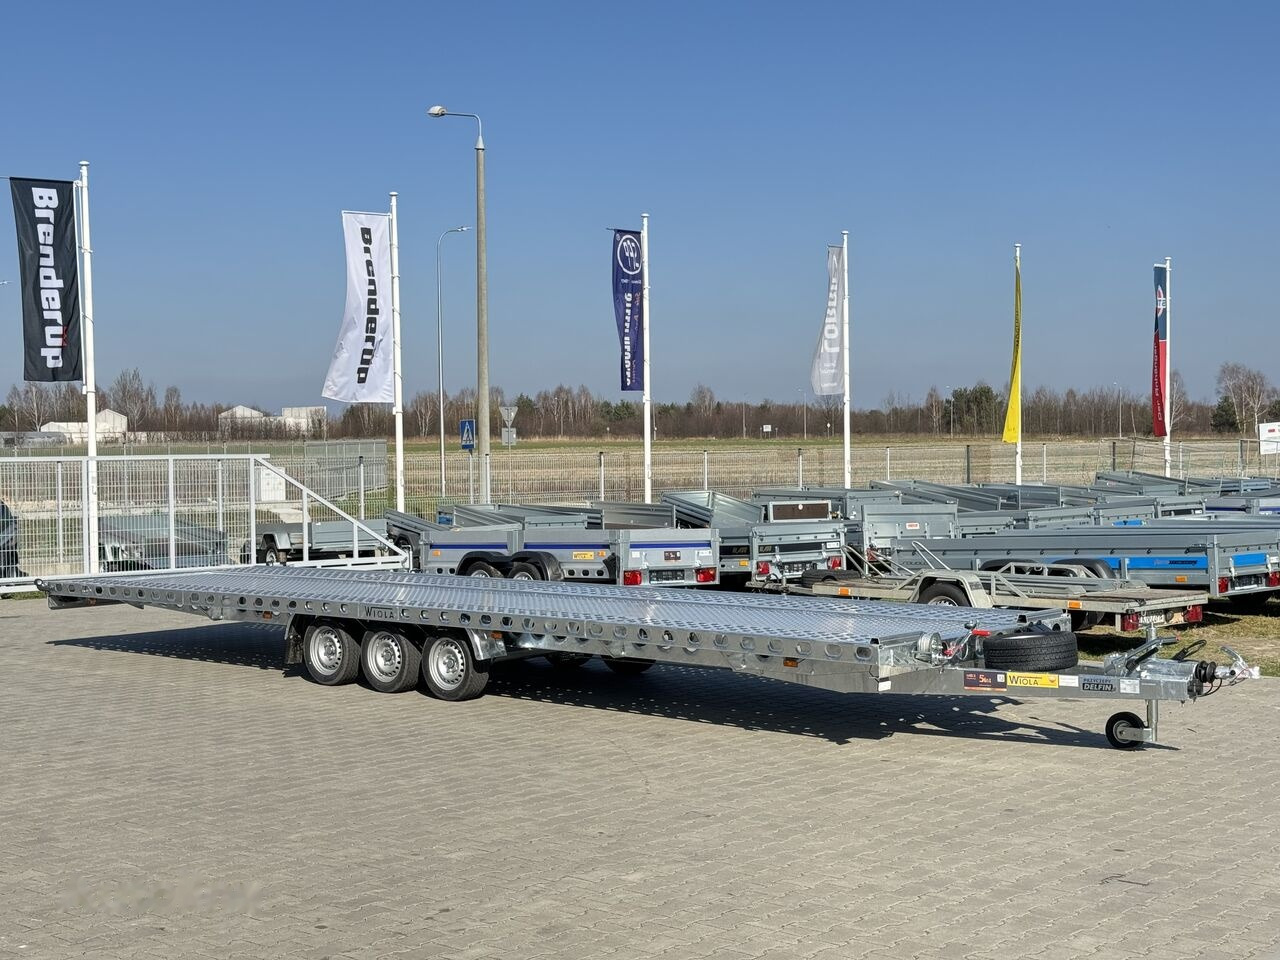 Remorque porte-voitures neuf Wiola L35G85 8.5m long trailer with 3 axles for transport of 2 cars: photos 3